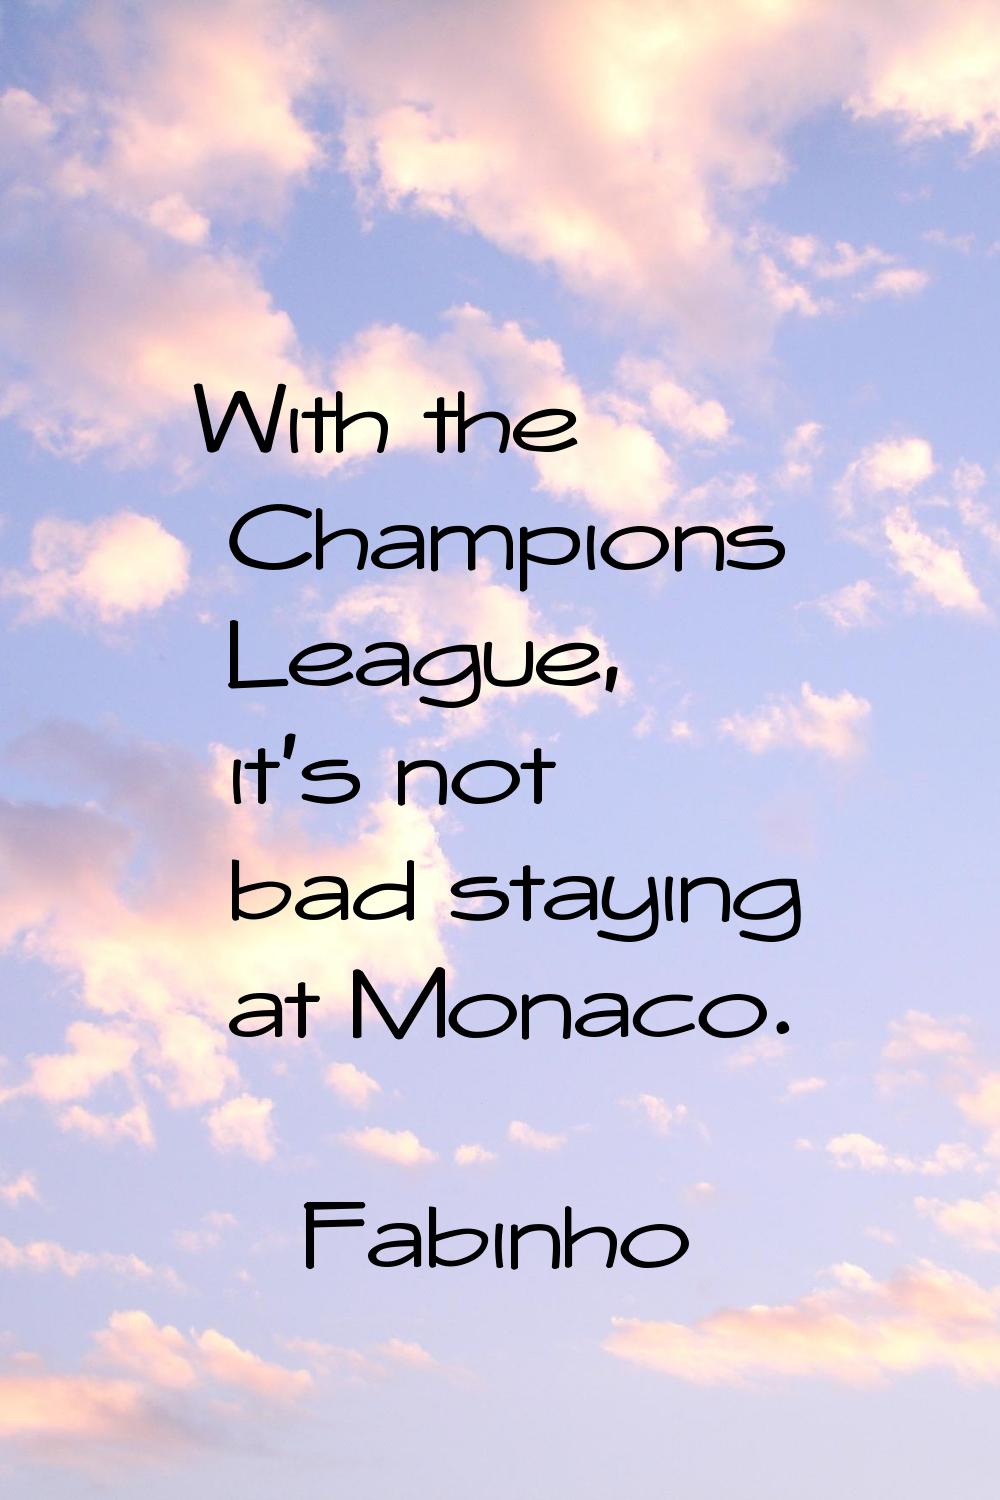 With the Champions League, it's not bad staying at Monaco.